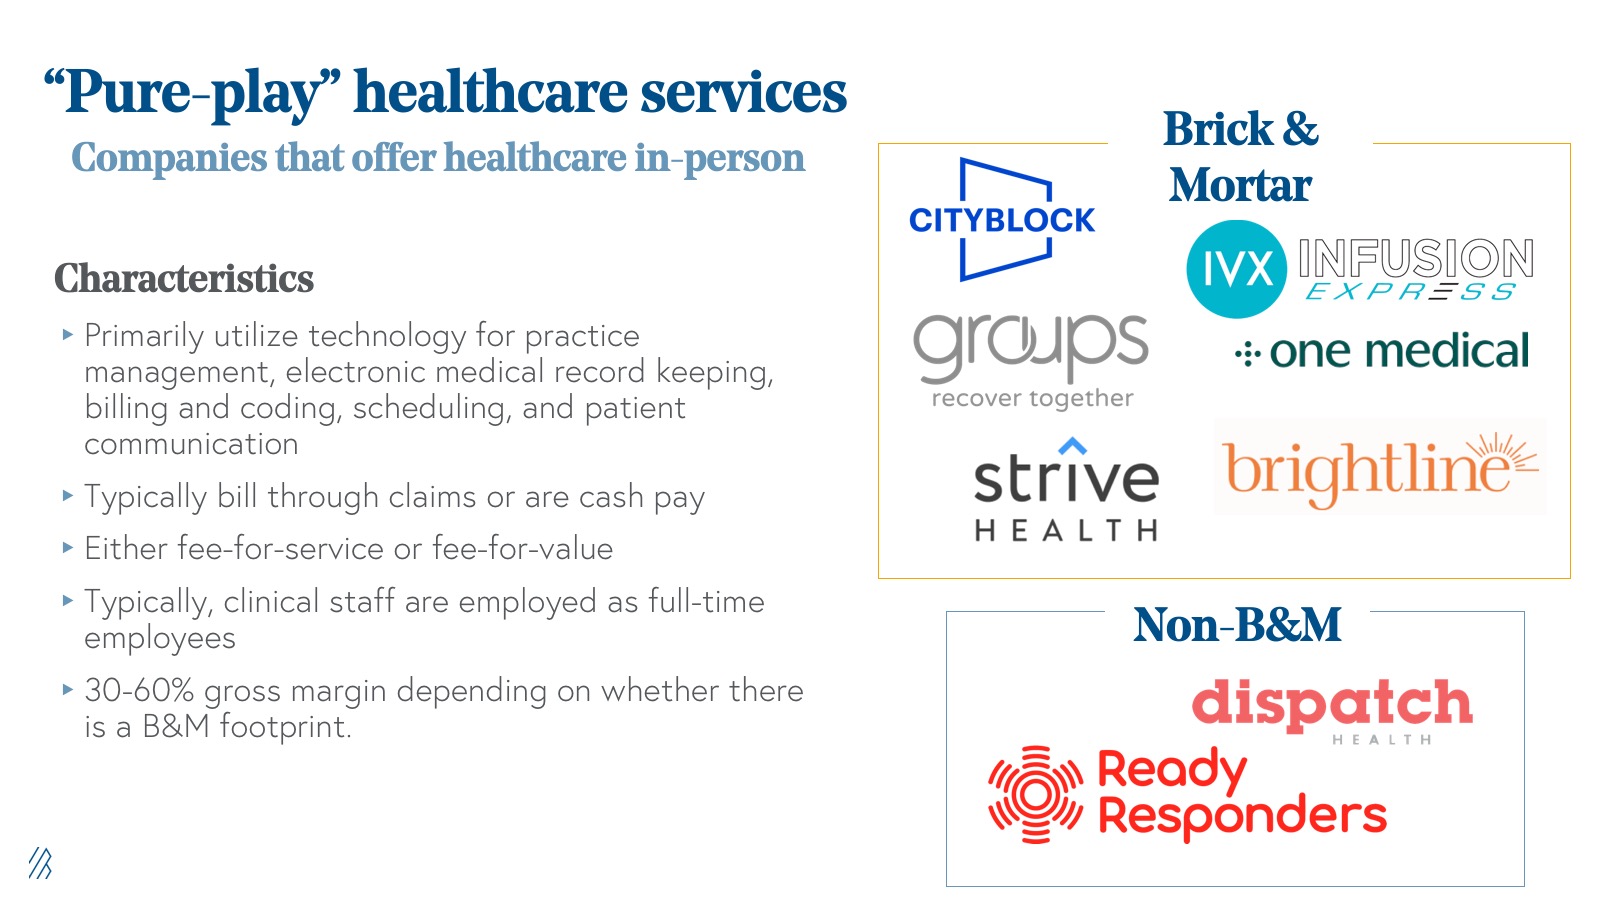 Pure-play healthcare services